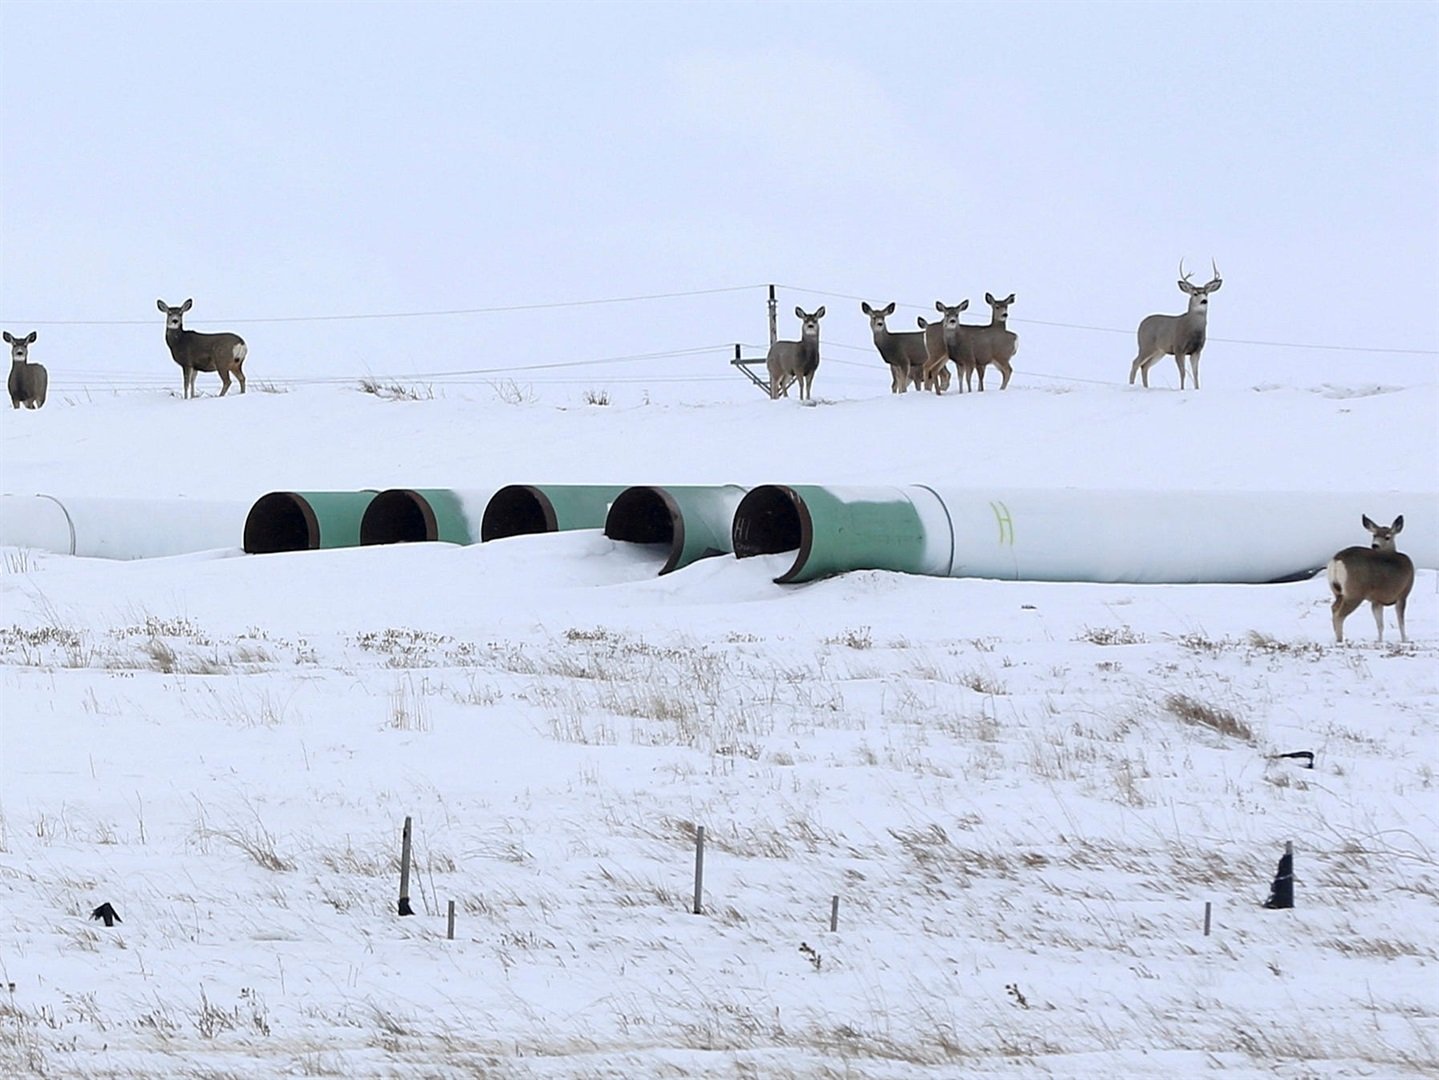 These pipes were to be used at the Keystone XL project that was officially terminated in June 2021. Terray Sylvester/Reuters